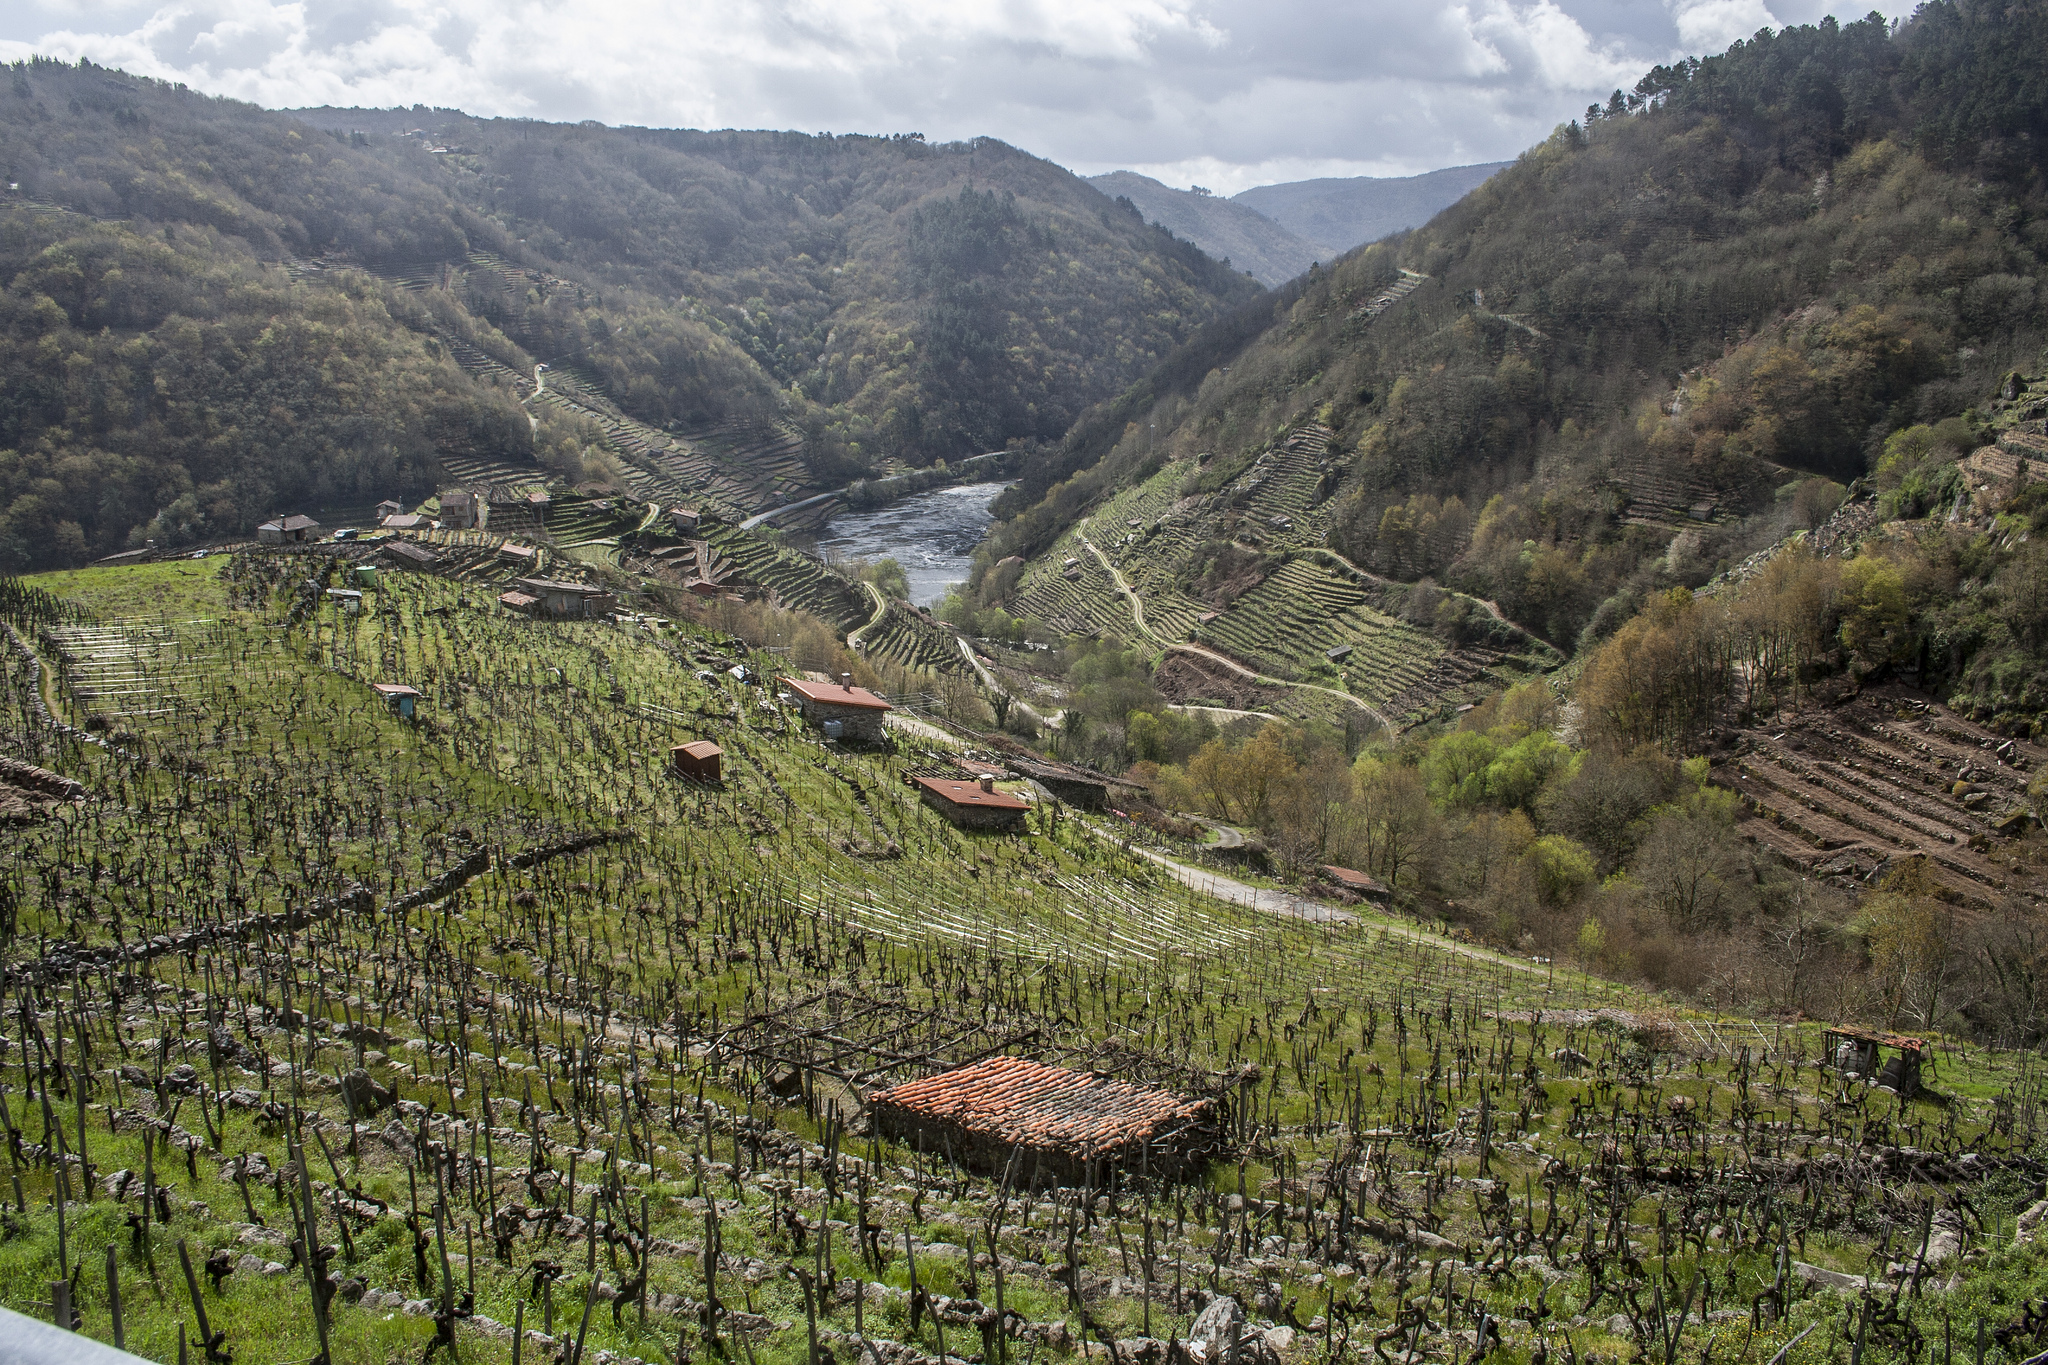 Vineyards in the canyons of the Ribeira Sacra